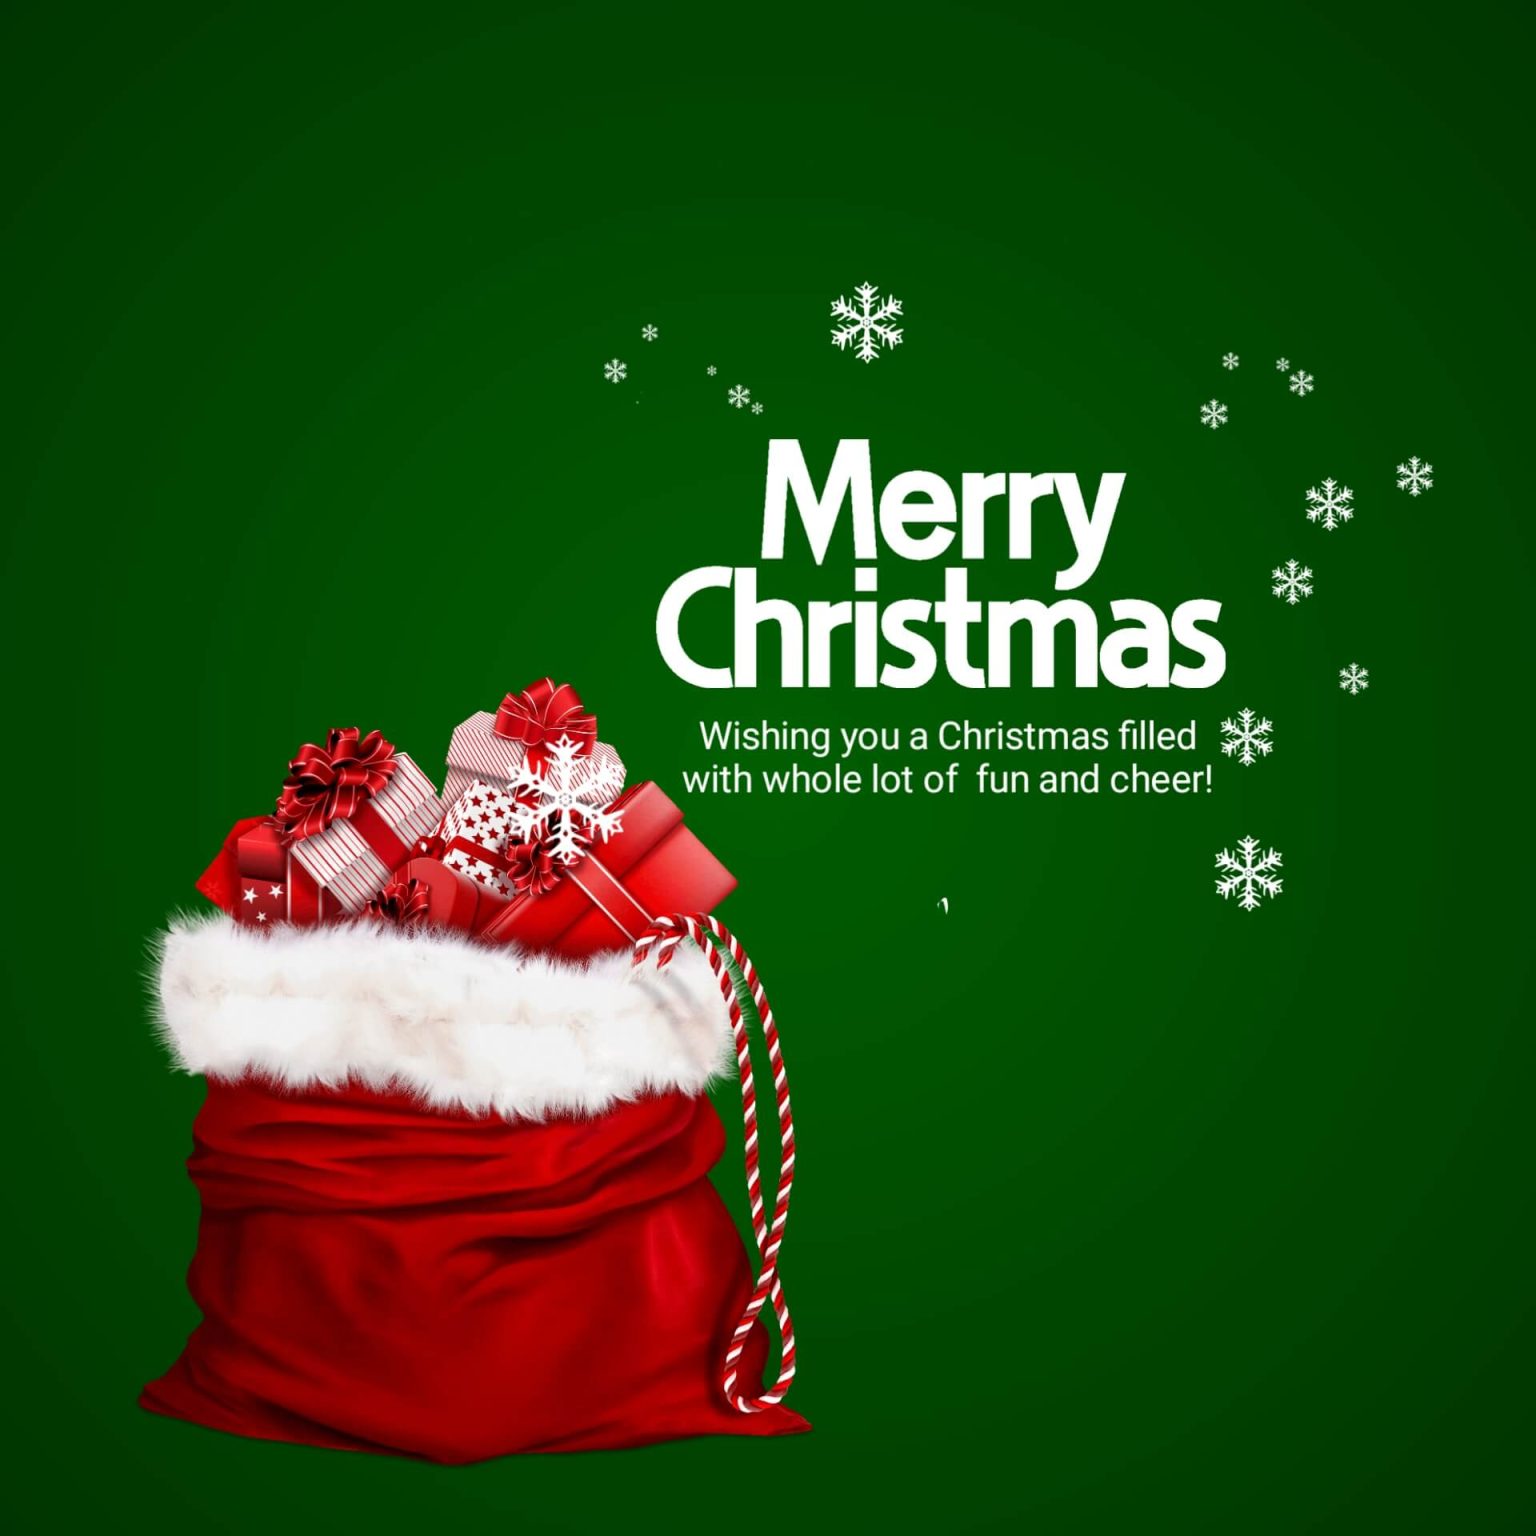 Best Merry Christmas 2021 images